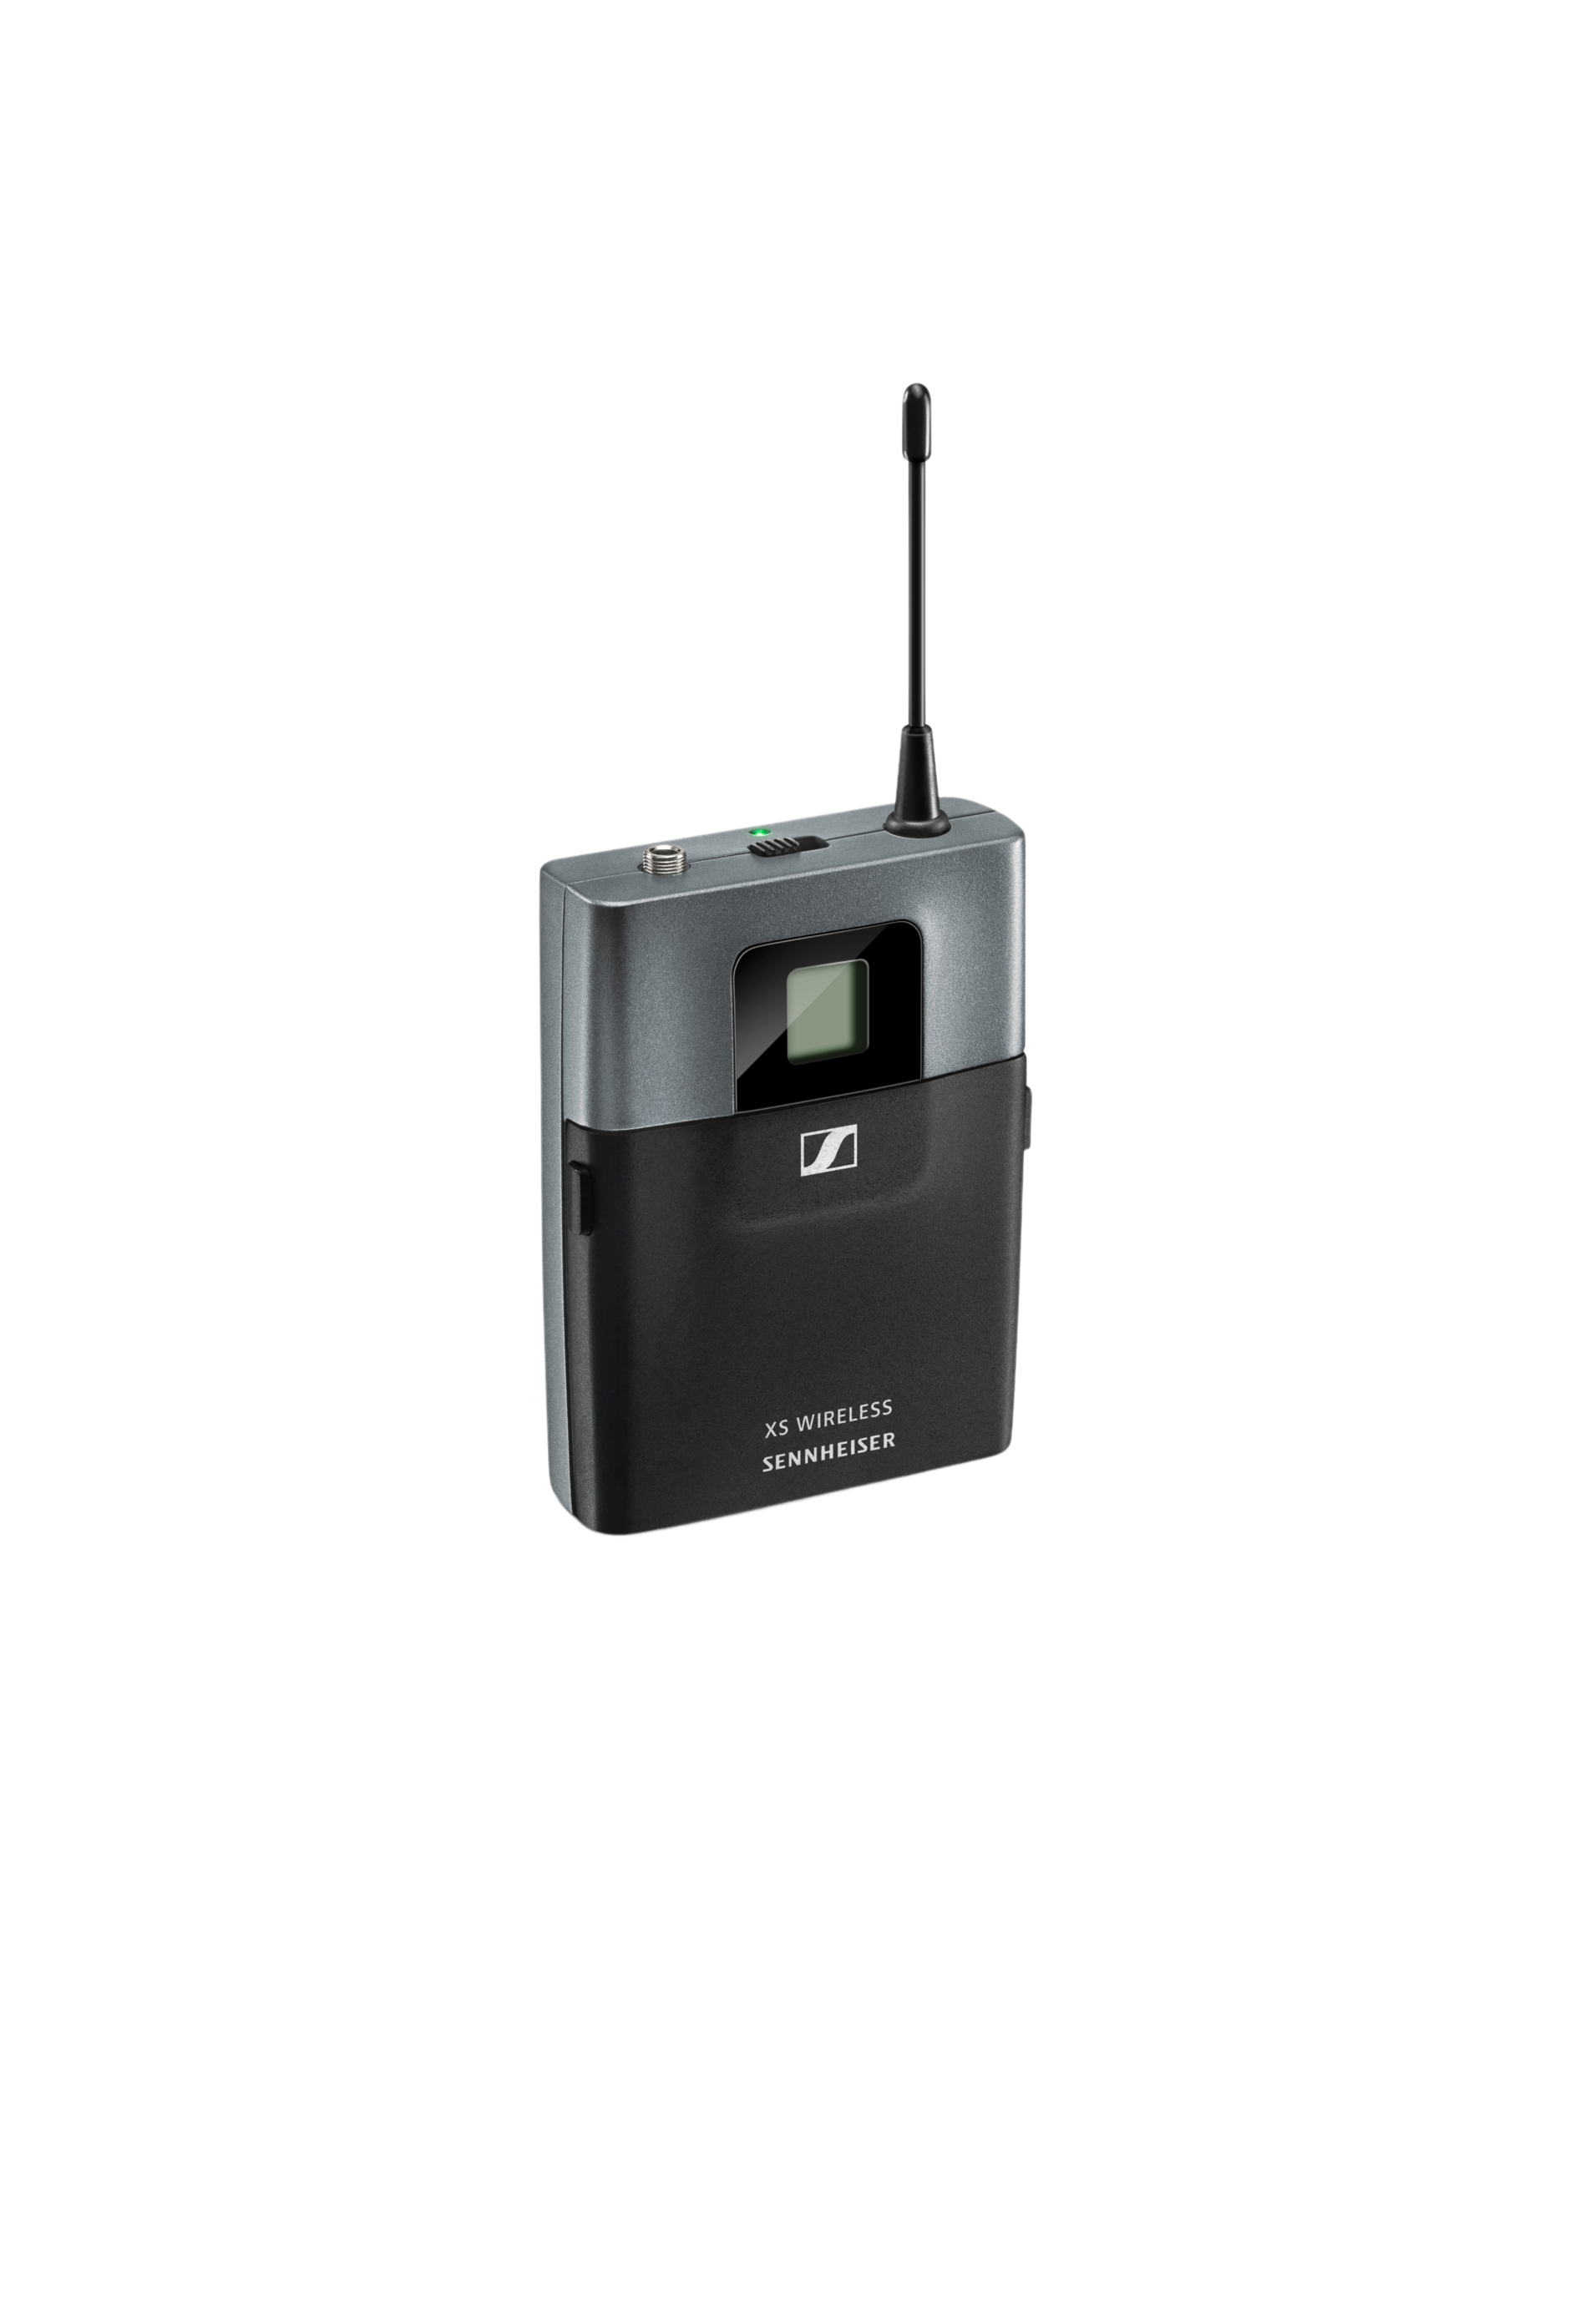 XS_Wireless_1_SK_Bodypack_Transmitter_product_shot_cutout_front_view.png